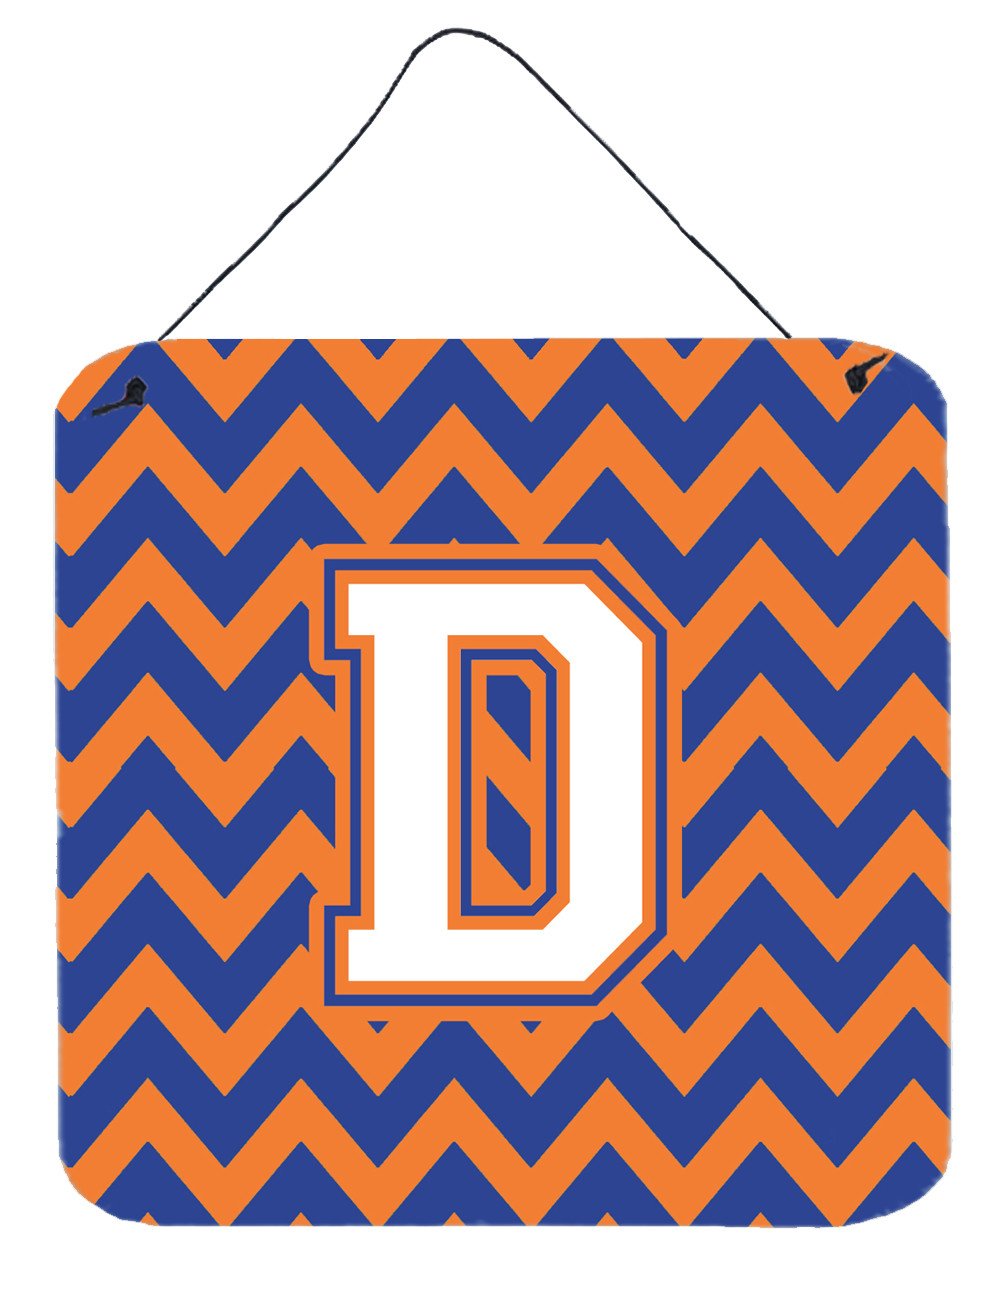 Letter D Chevron Blue and Orange #3 Wall or Door Hanging Prints CJ1060-DDS66 by Caroline's Treasures